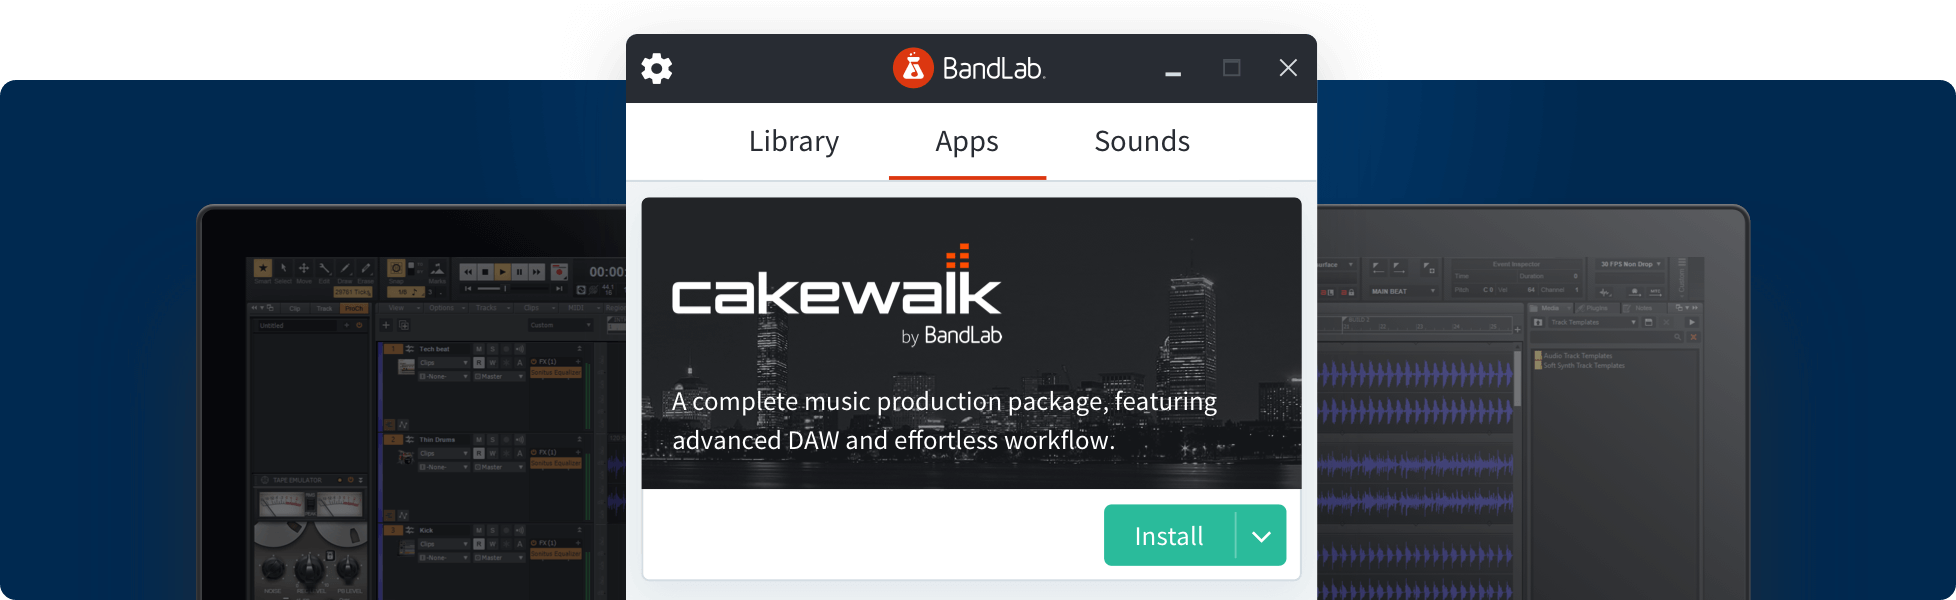 how to activate cakewalk by bandlab